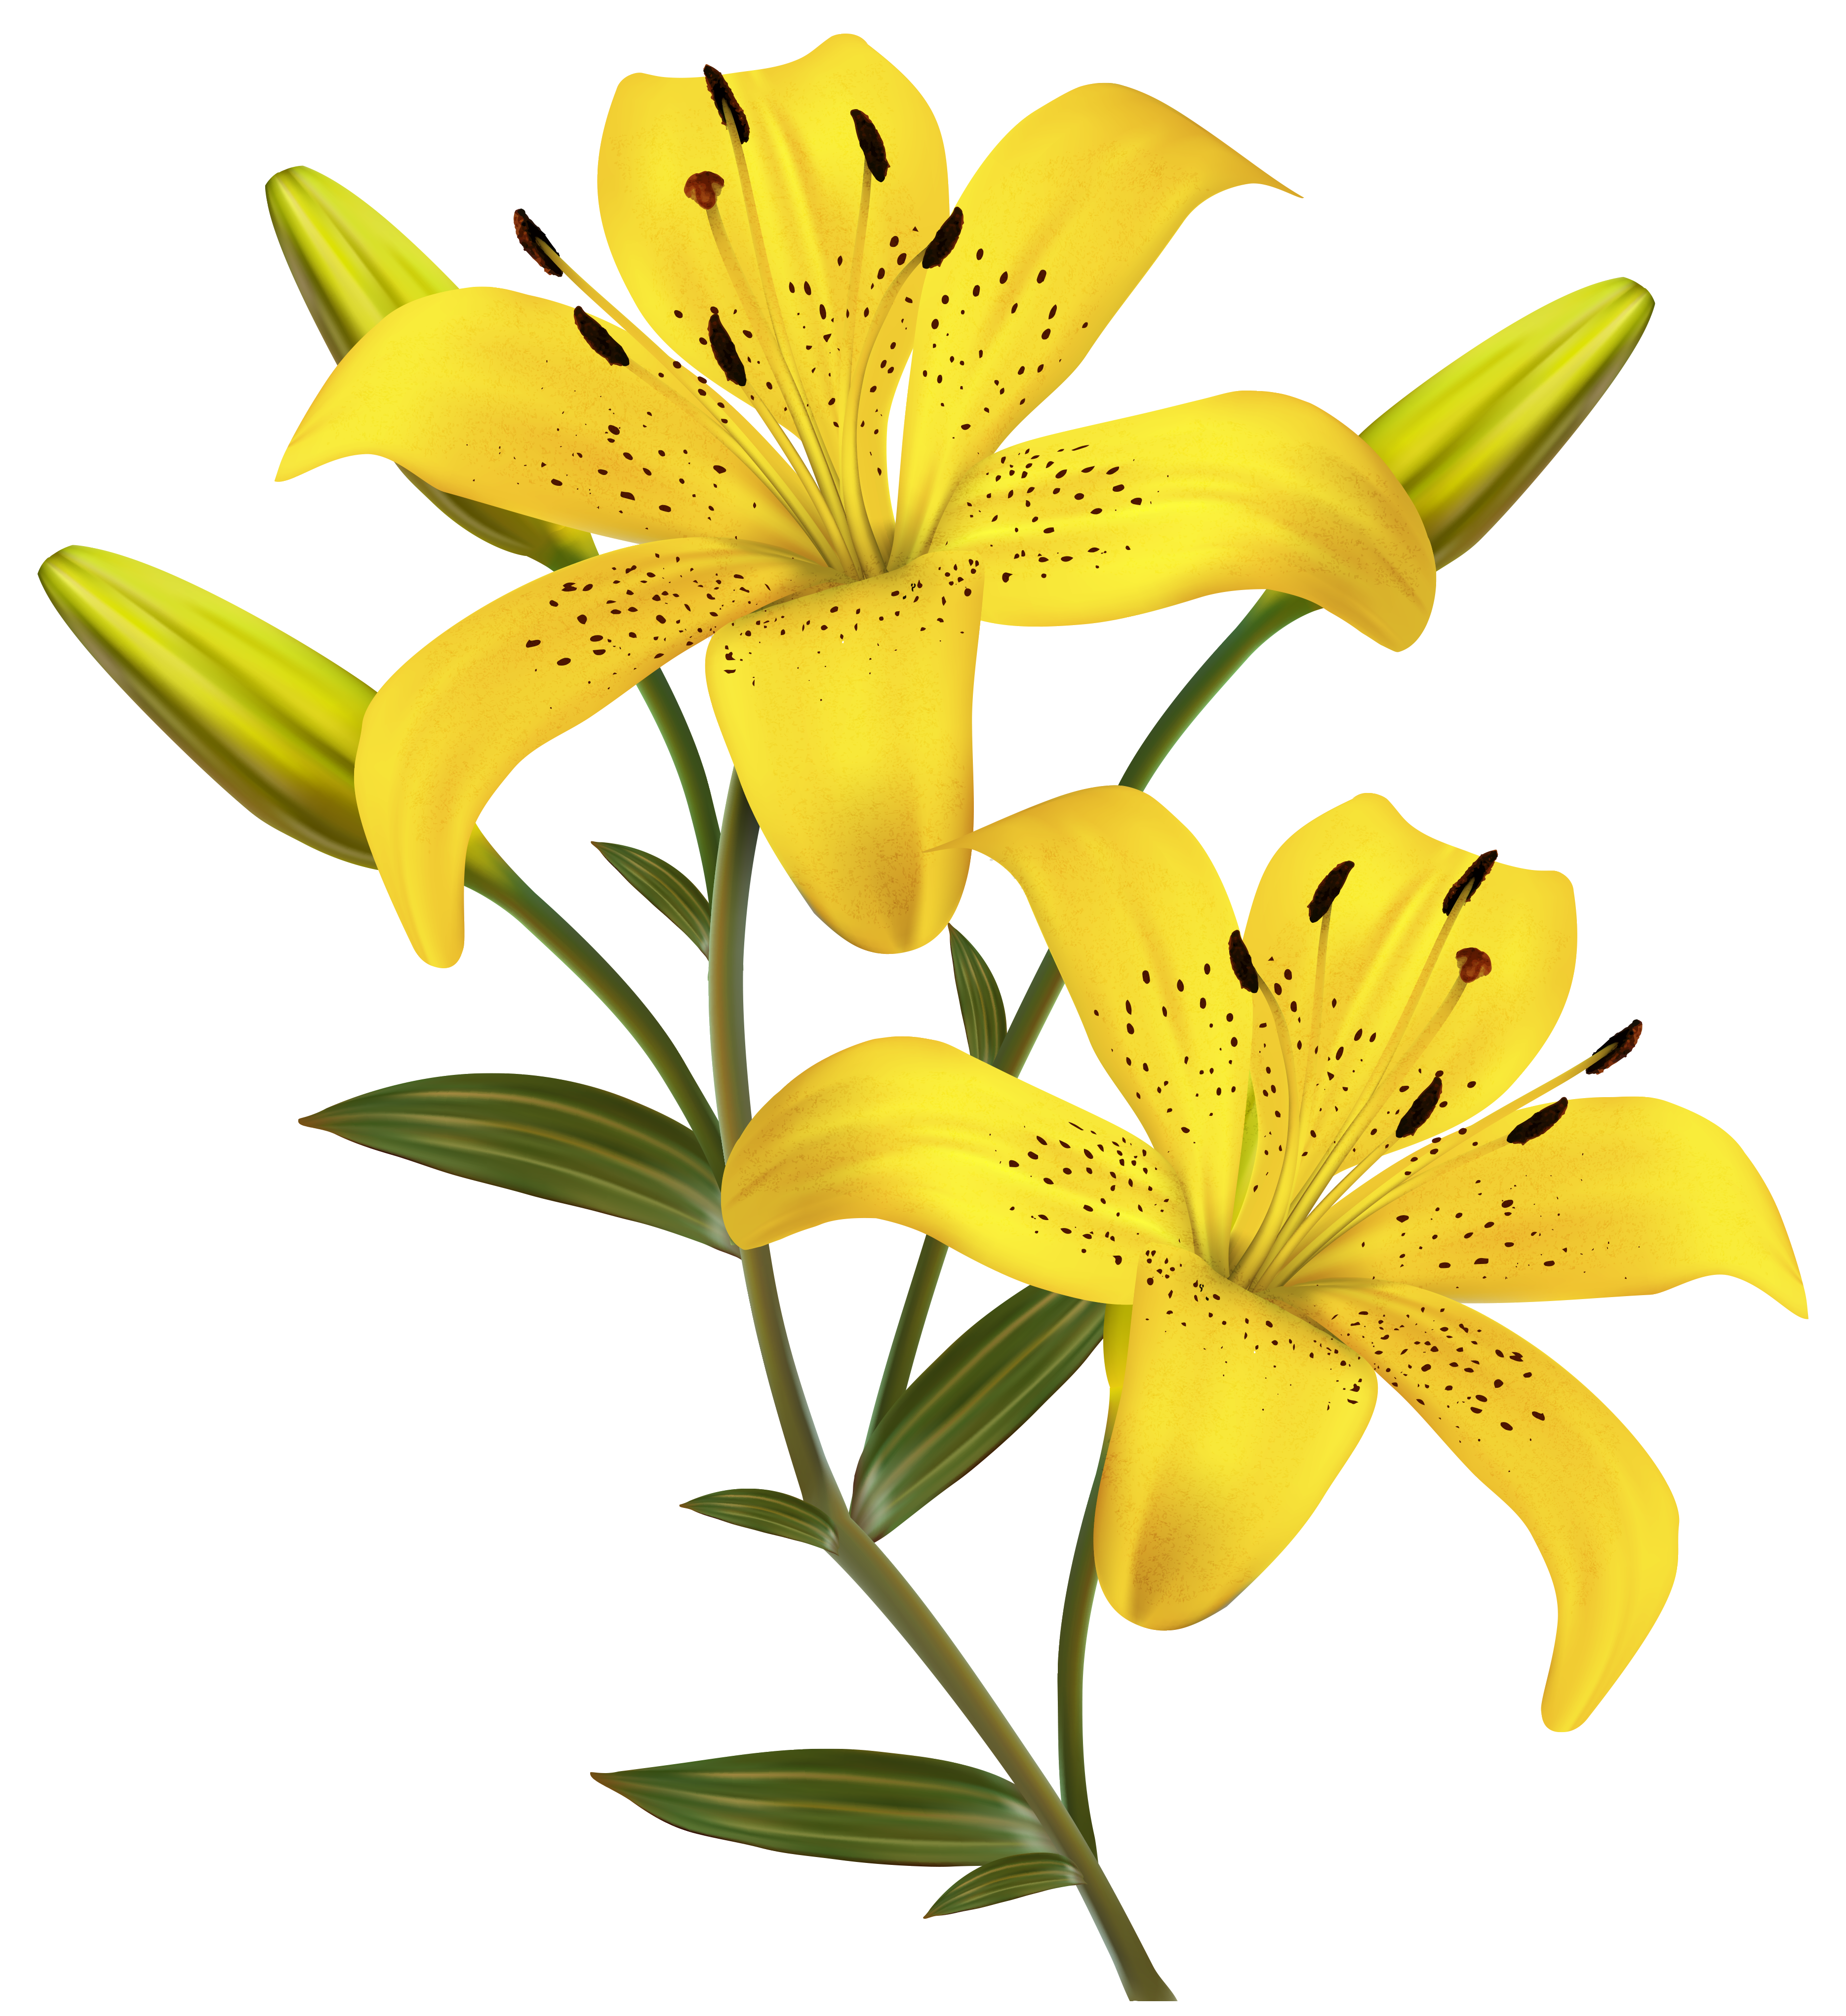 lily flower clip art free - photo #13